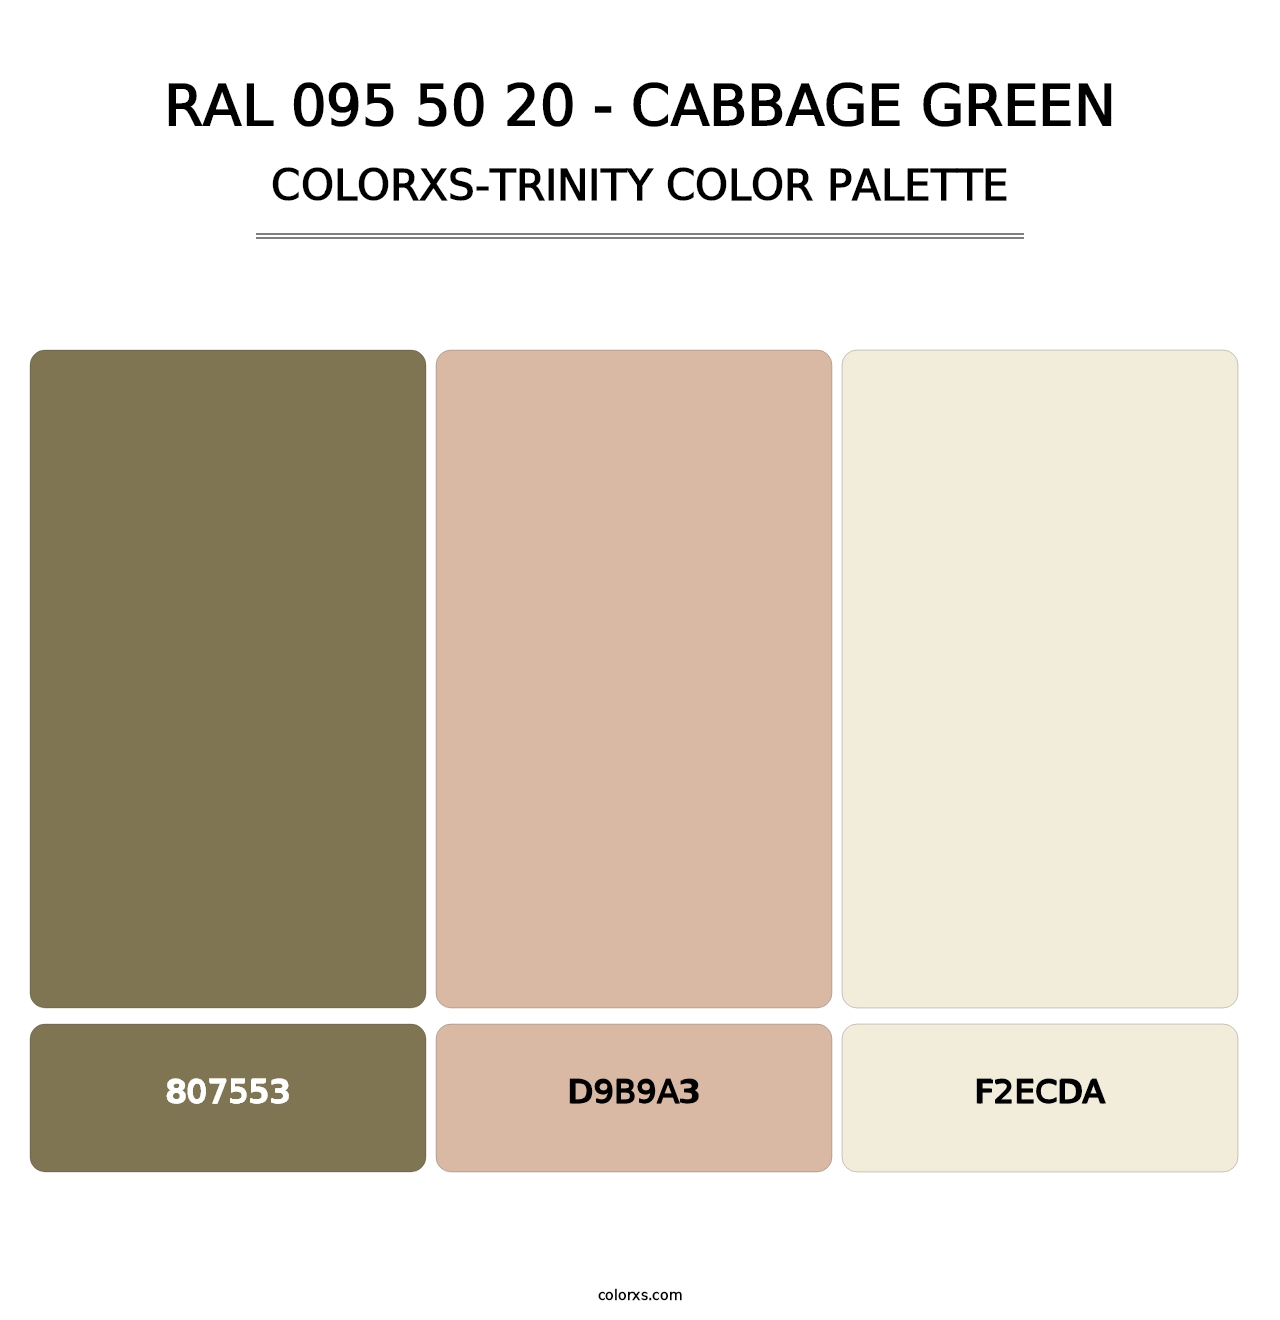 RAL 095 50 20 - Cabbage Green - Colorxs Trinity Palette